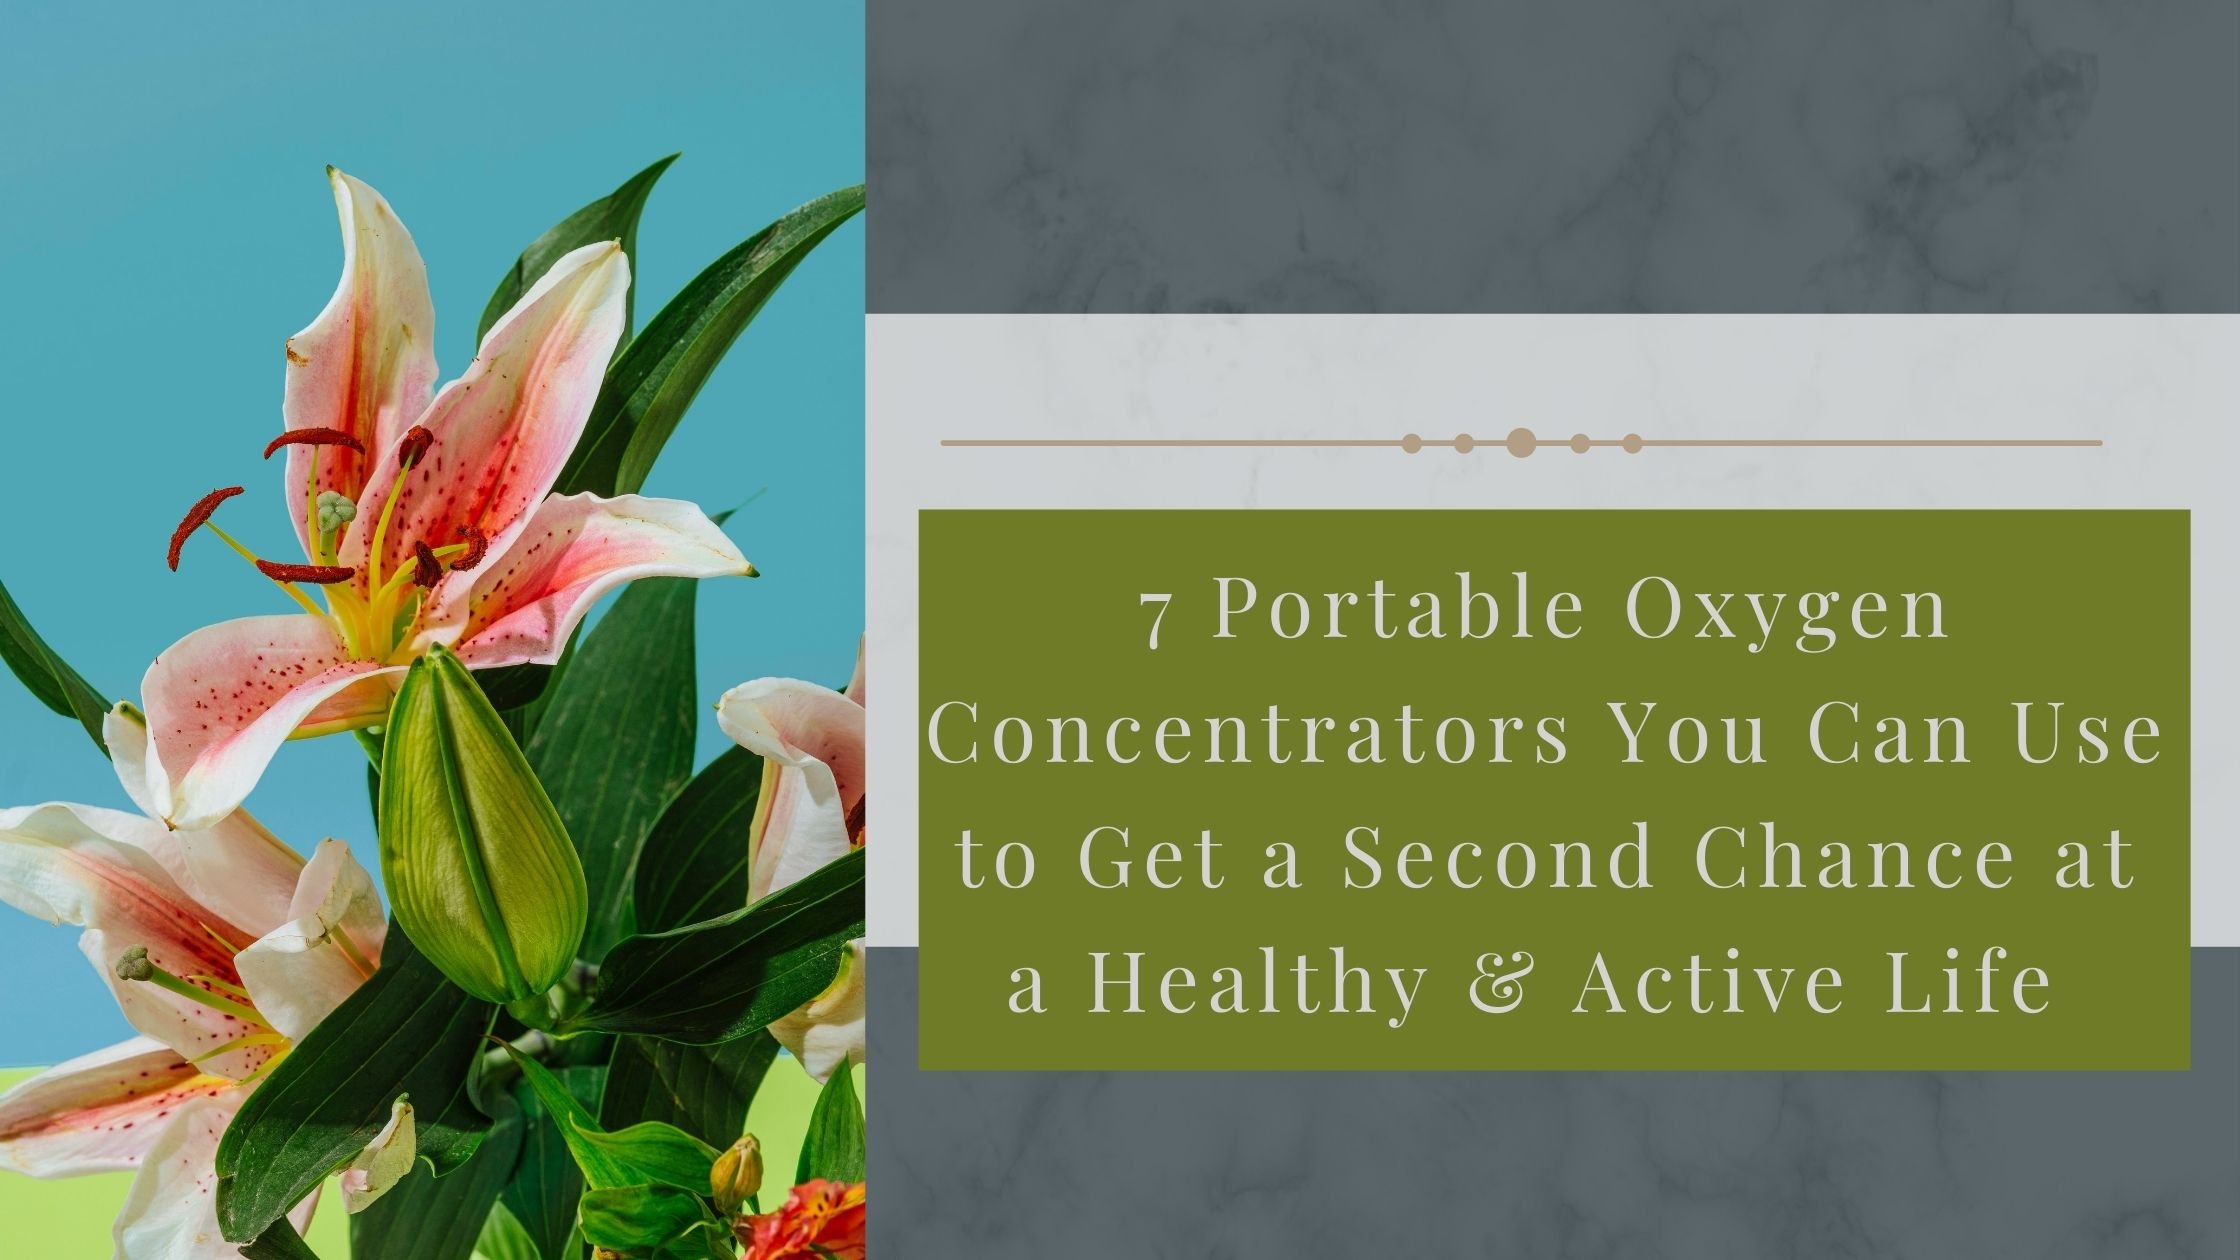 7 Portable Oxygen Concentrators You Can Use to Get a Second Chance at a Healthy and Active Life